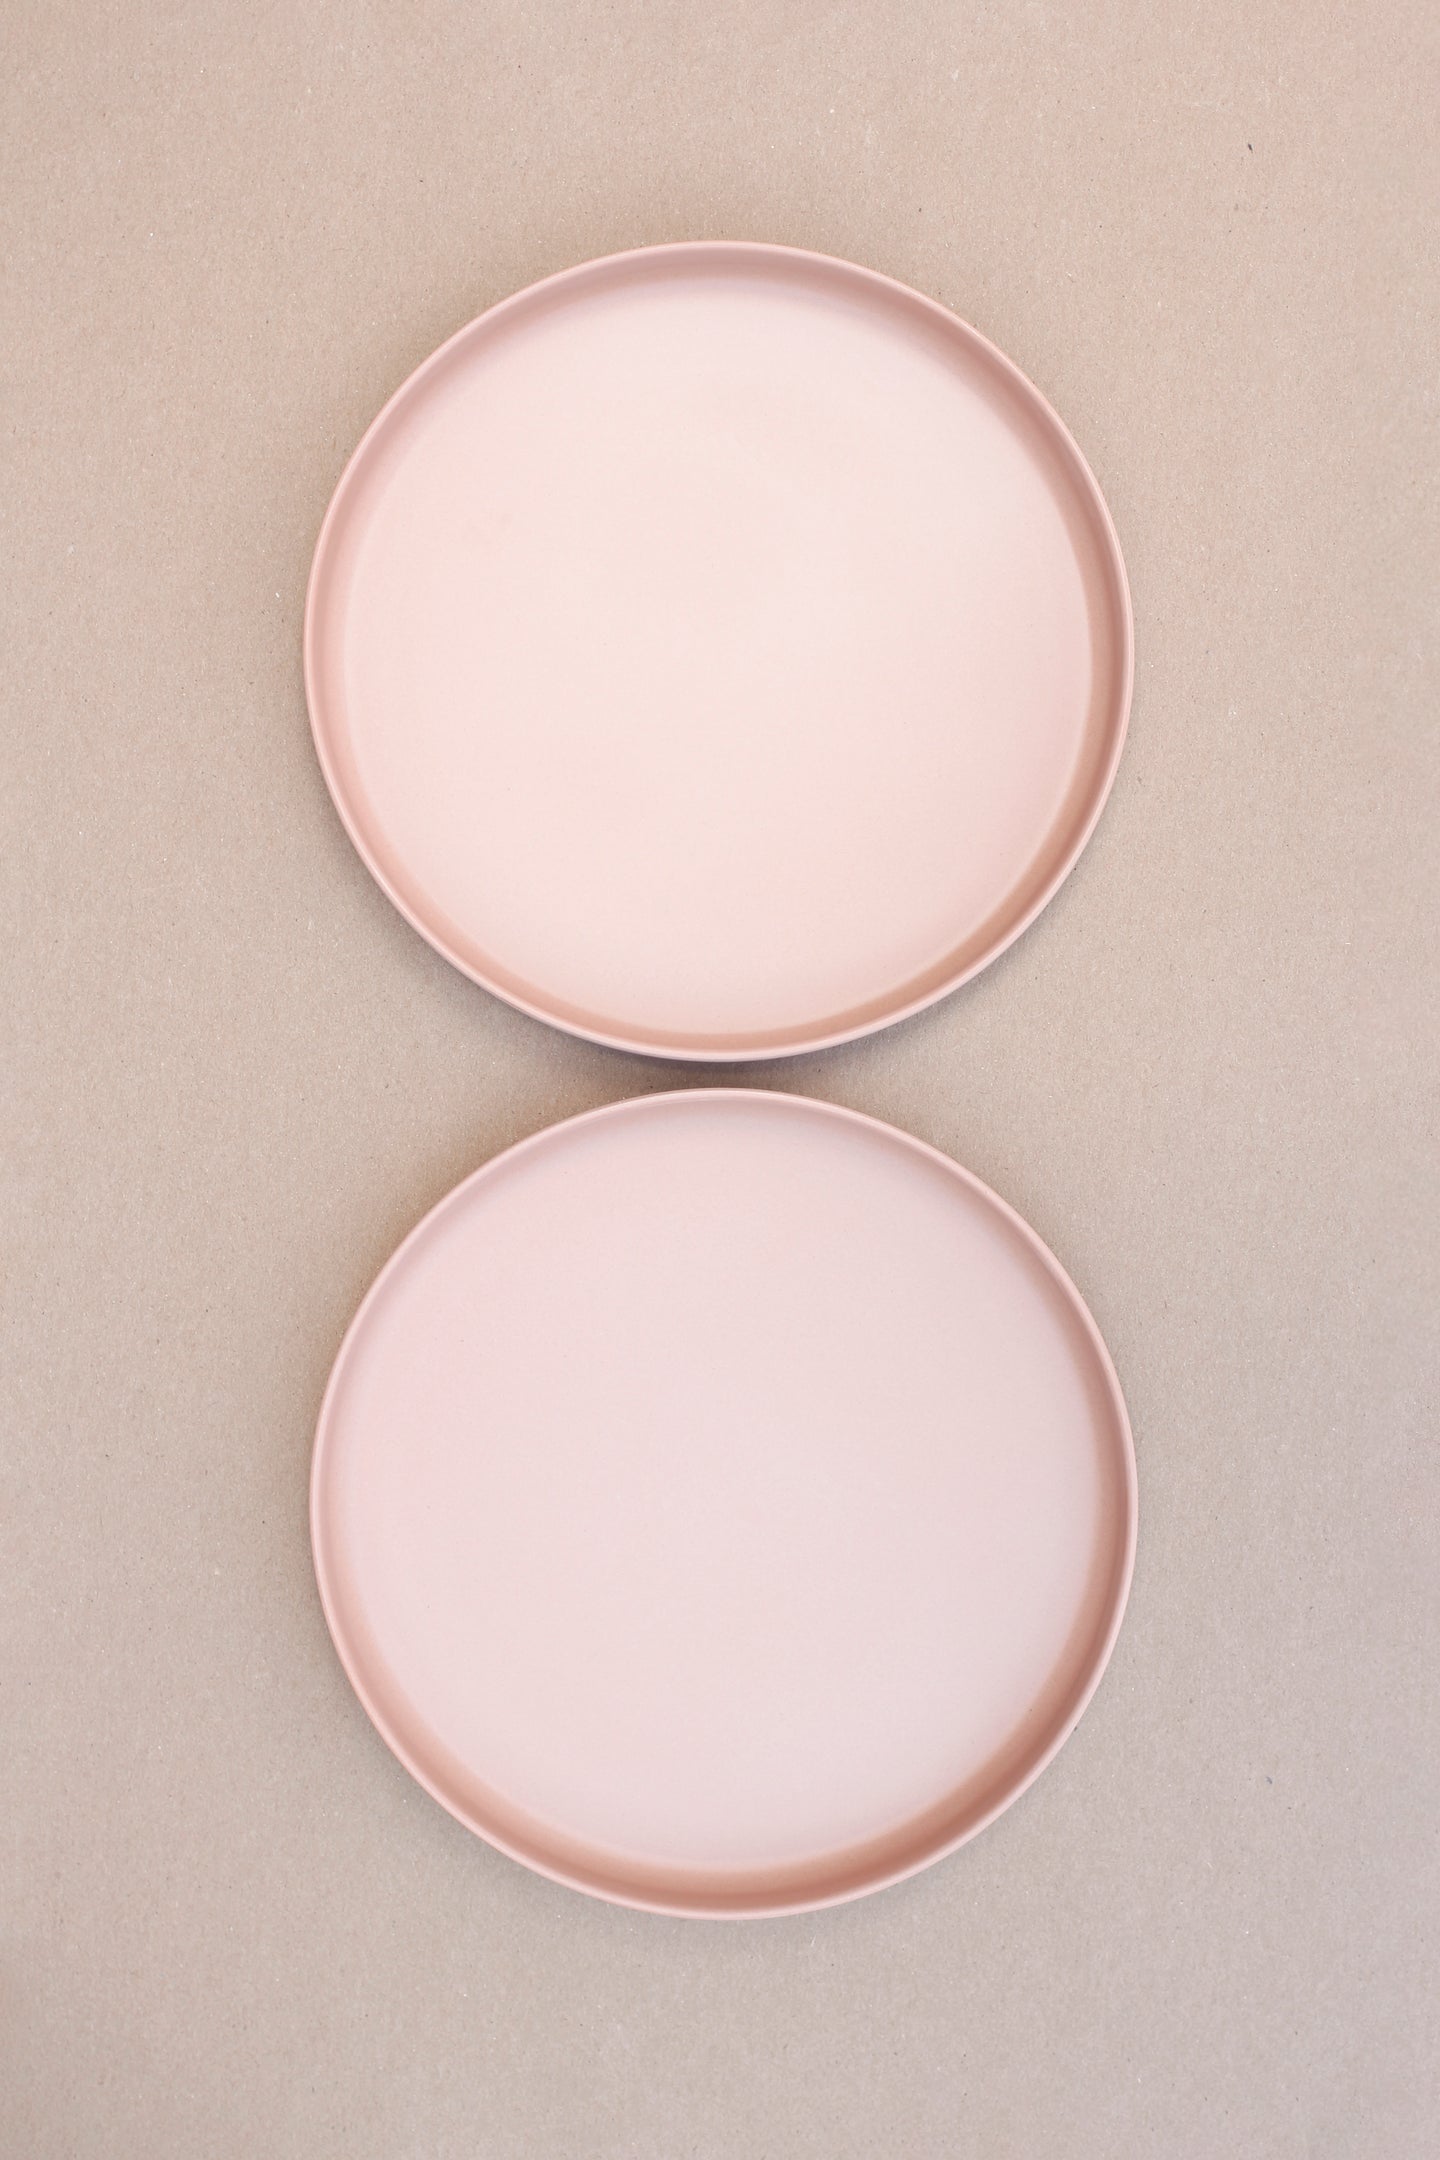 Bamboo Plate Set Of 2 - Cameo